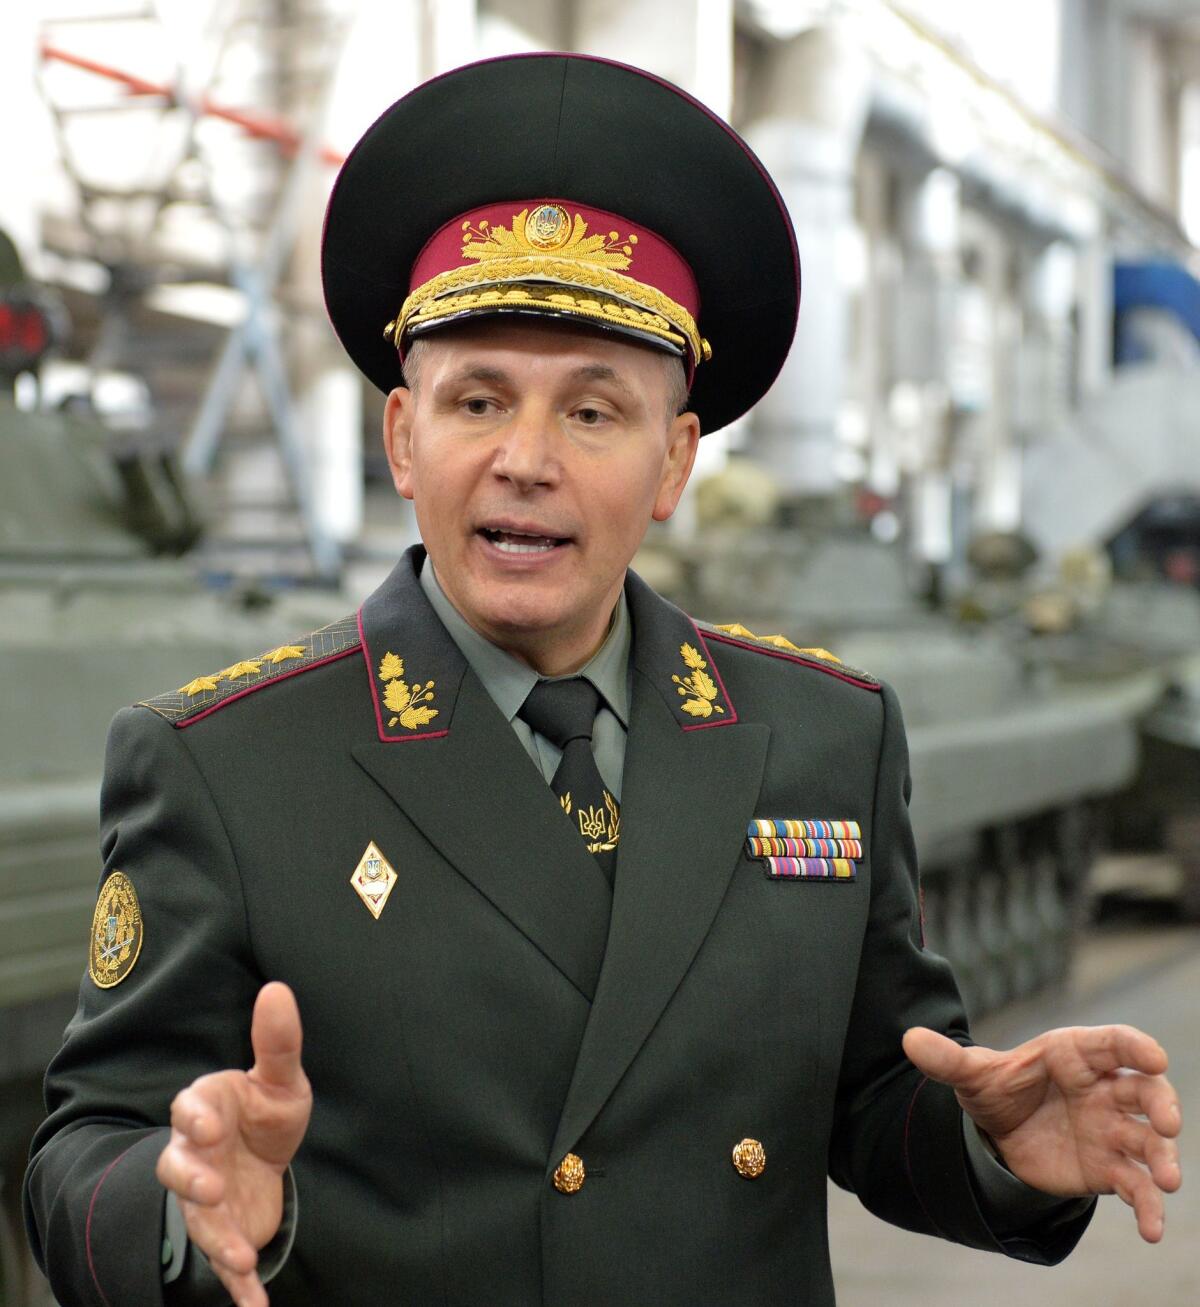 Ukrainian Defense Minister Valery Heletey, shown last month, will be replaced, President Petro Poroshenko announced Sunday. His successor, to be named Monday, will be the fourth military chief in embattled Ukraine this year.